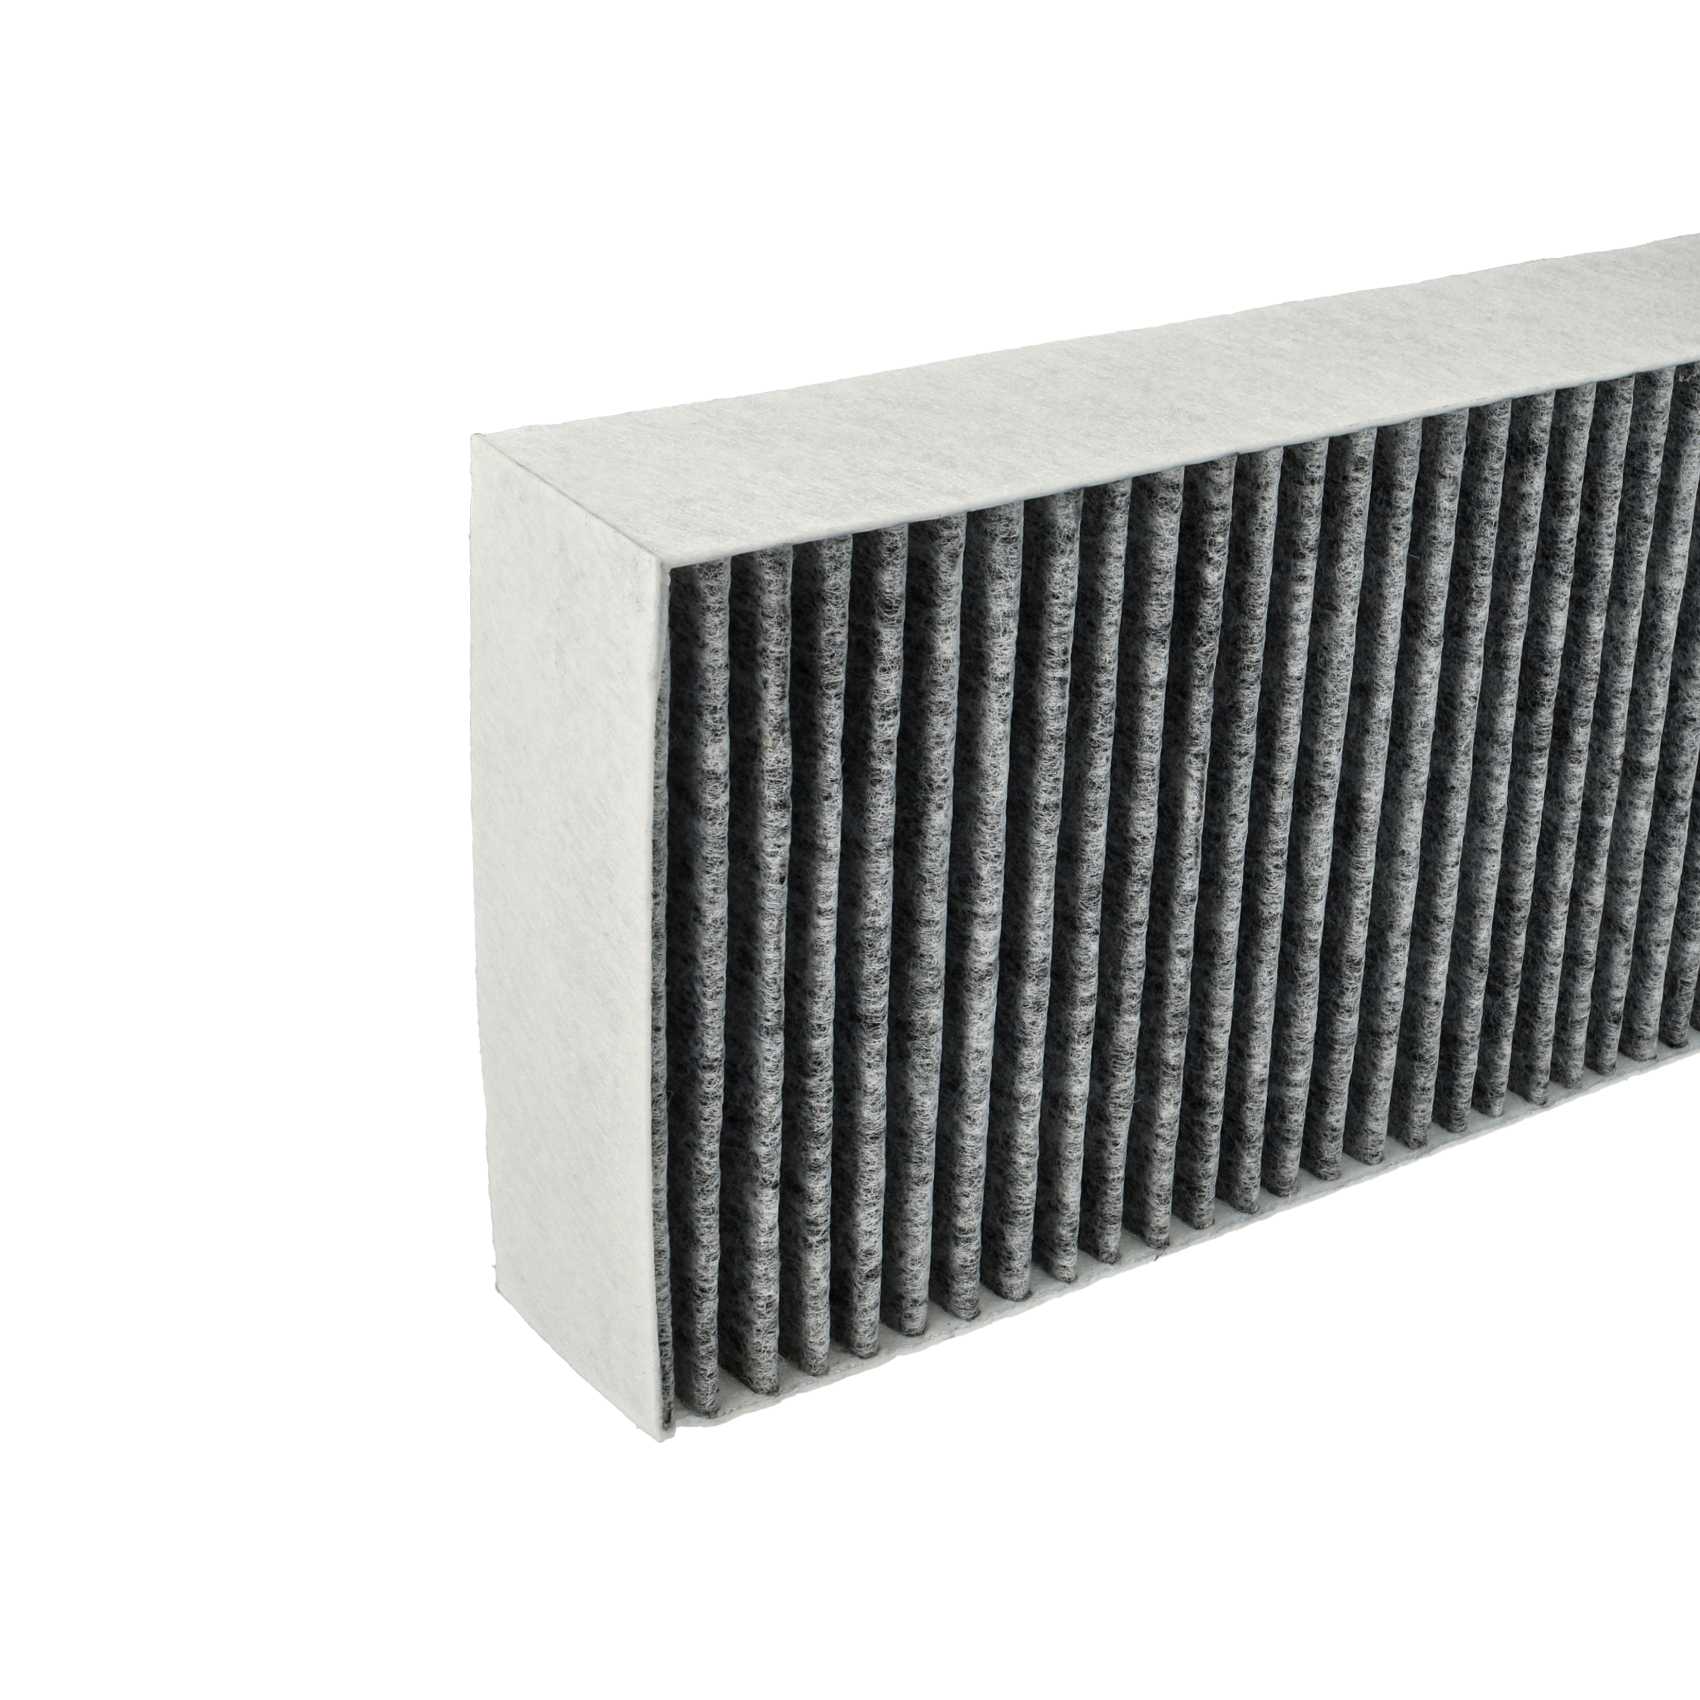 4x Activated Carbon Filter as Replacement for Bora BAKFS, BAKFS-002 for Bora Hob - 34 x 12.2 x 4.25 cm